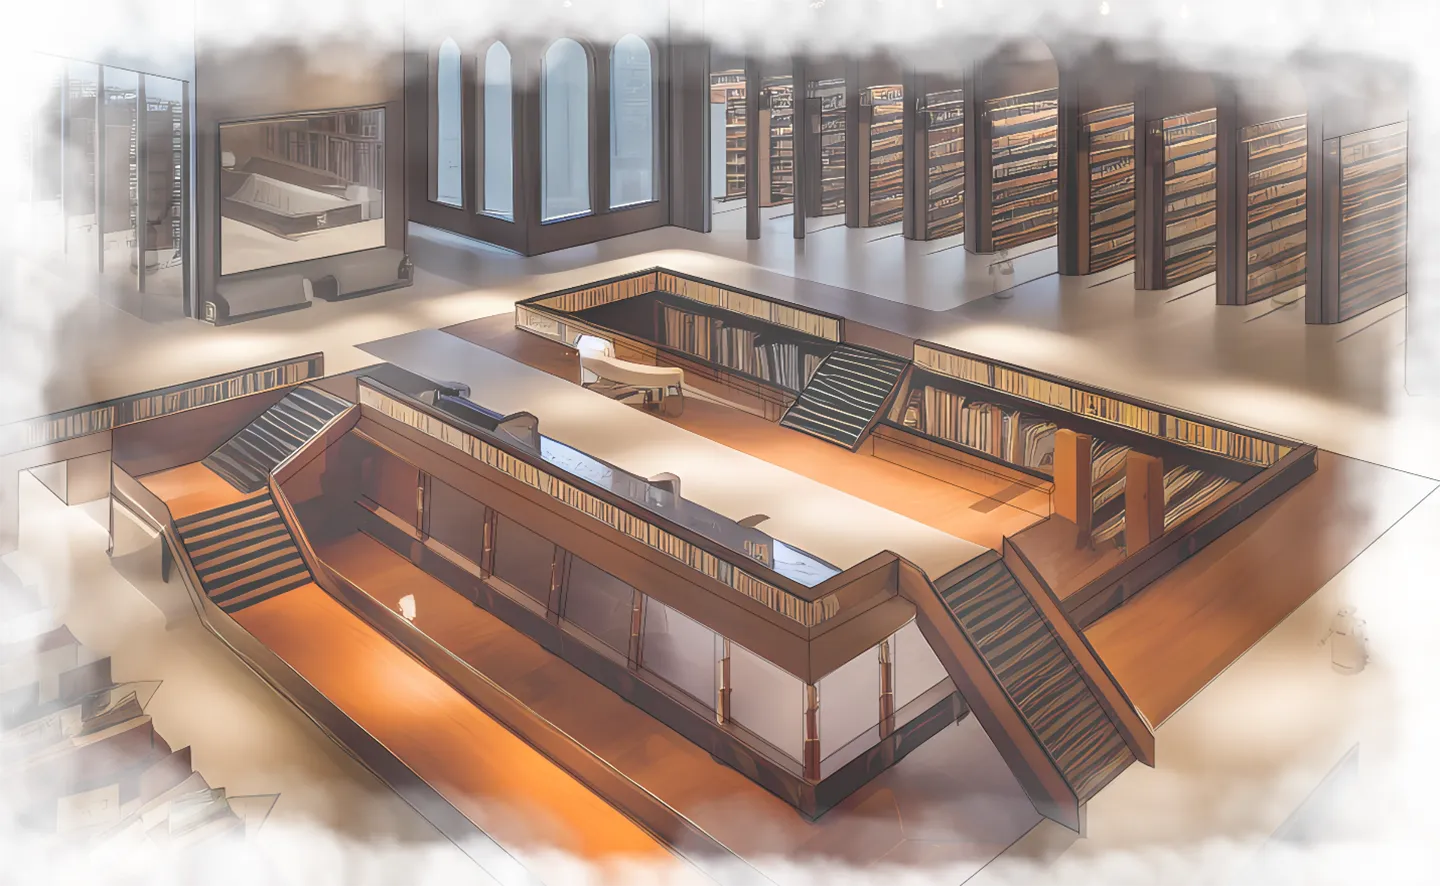 The group’s library design included traditional storage and reading areas in addition to aspects of technology integration. Rendering by Nathanael Campos Jimenez.